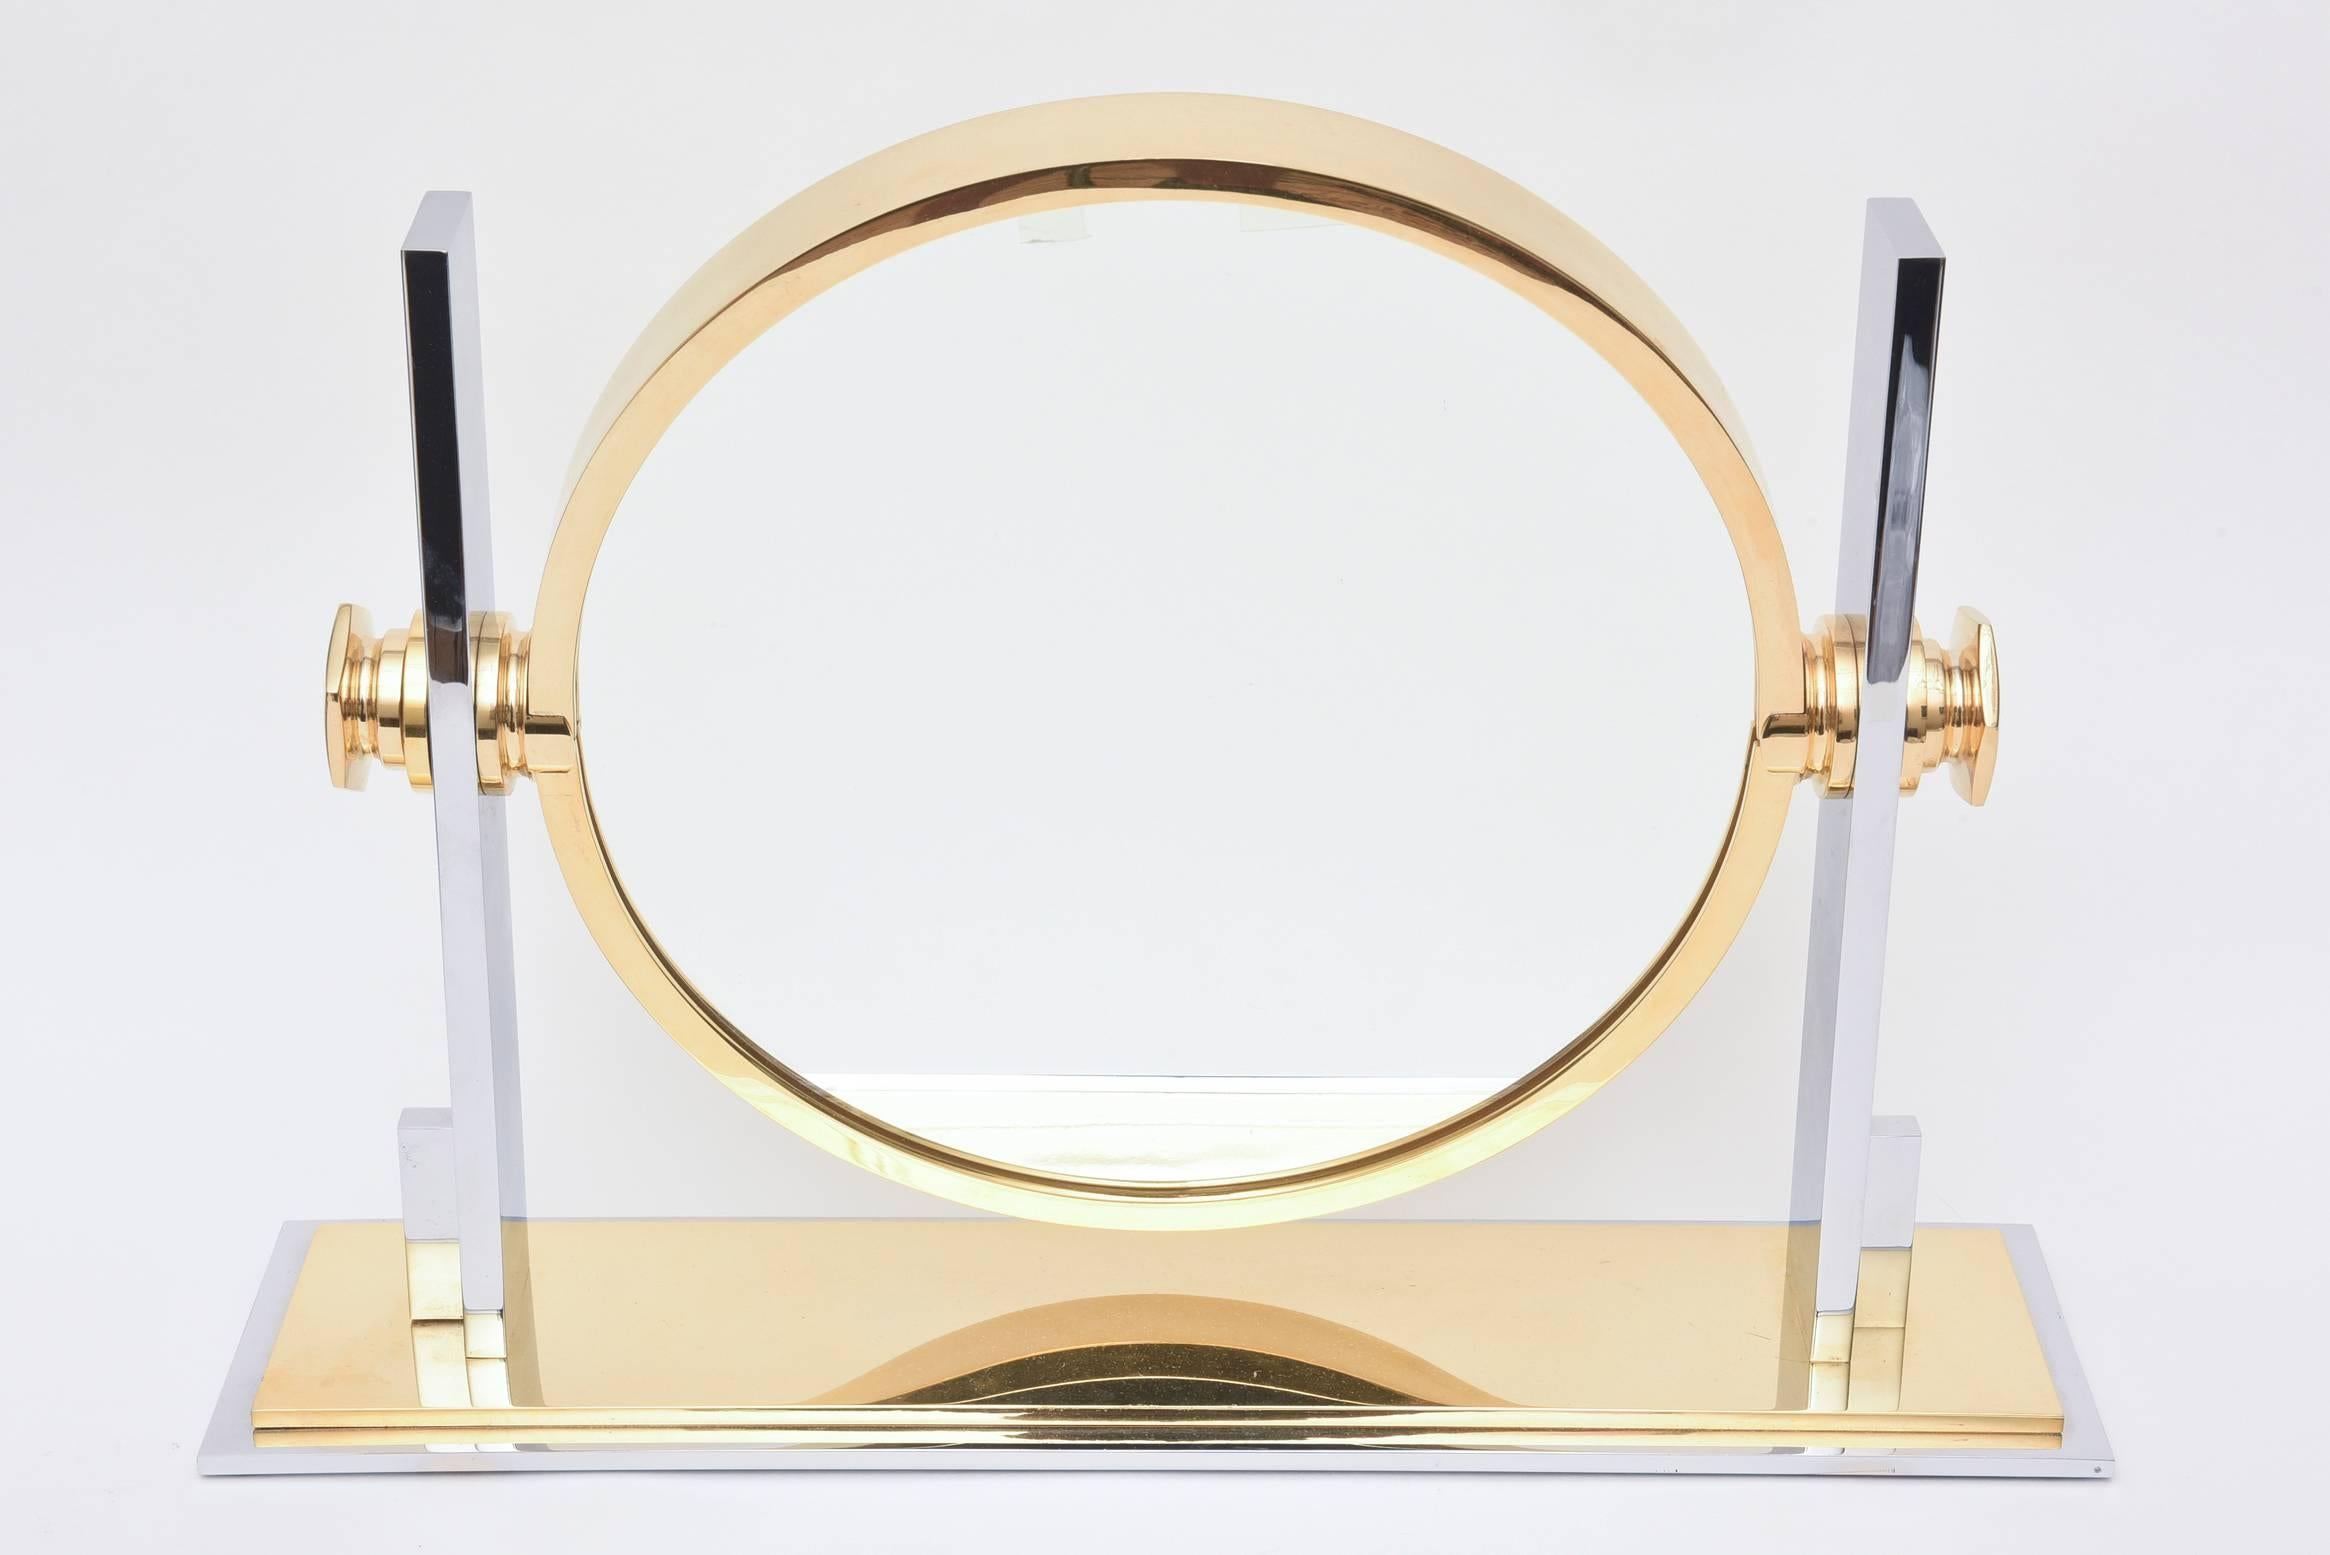 This 24-karat gold-plated over chrome and chrome-plated brass vanity mirror has the double sides, one for magnification and the other normal. The richness of the mixed metals add depth.
It is Karl Springer. The weight and modern design transcends